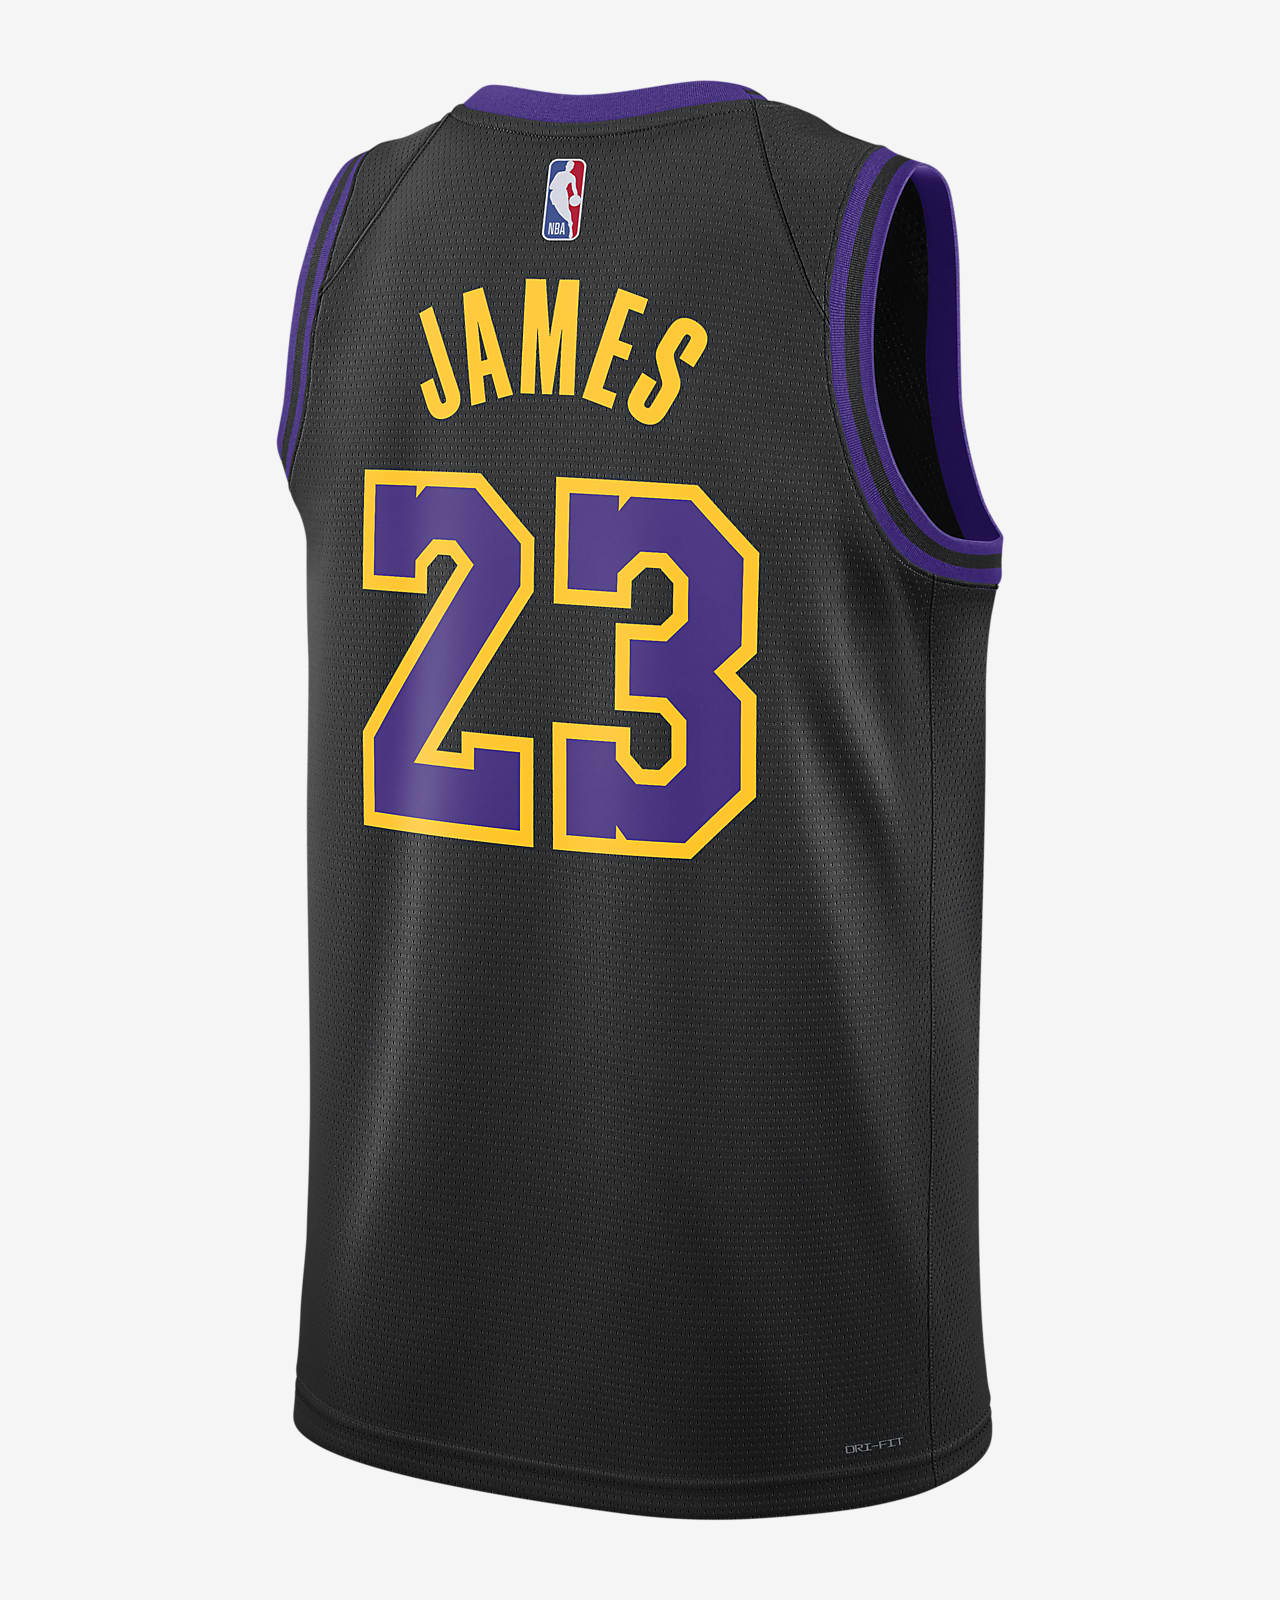 james lakers jersey